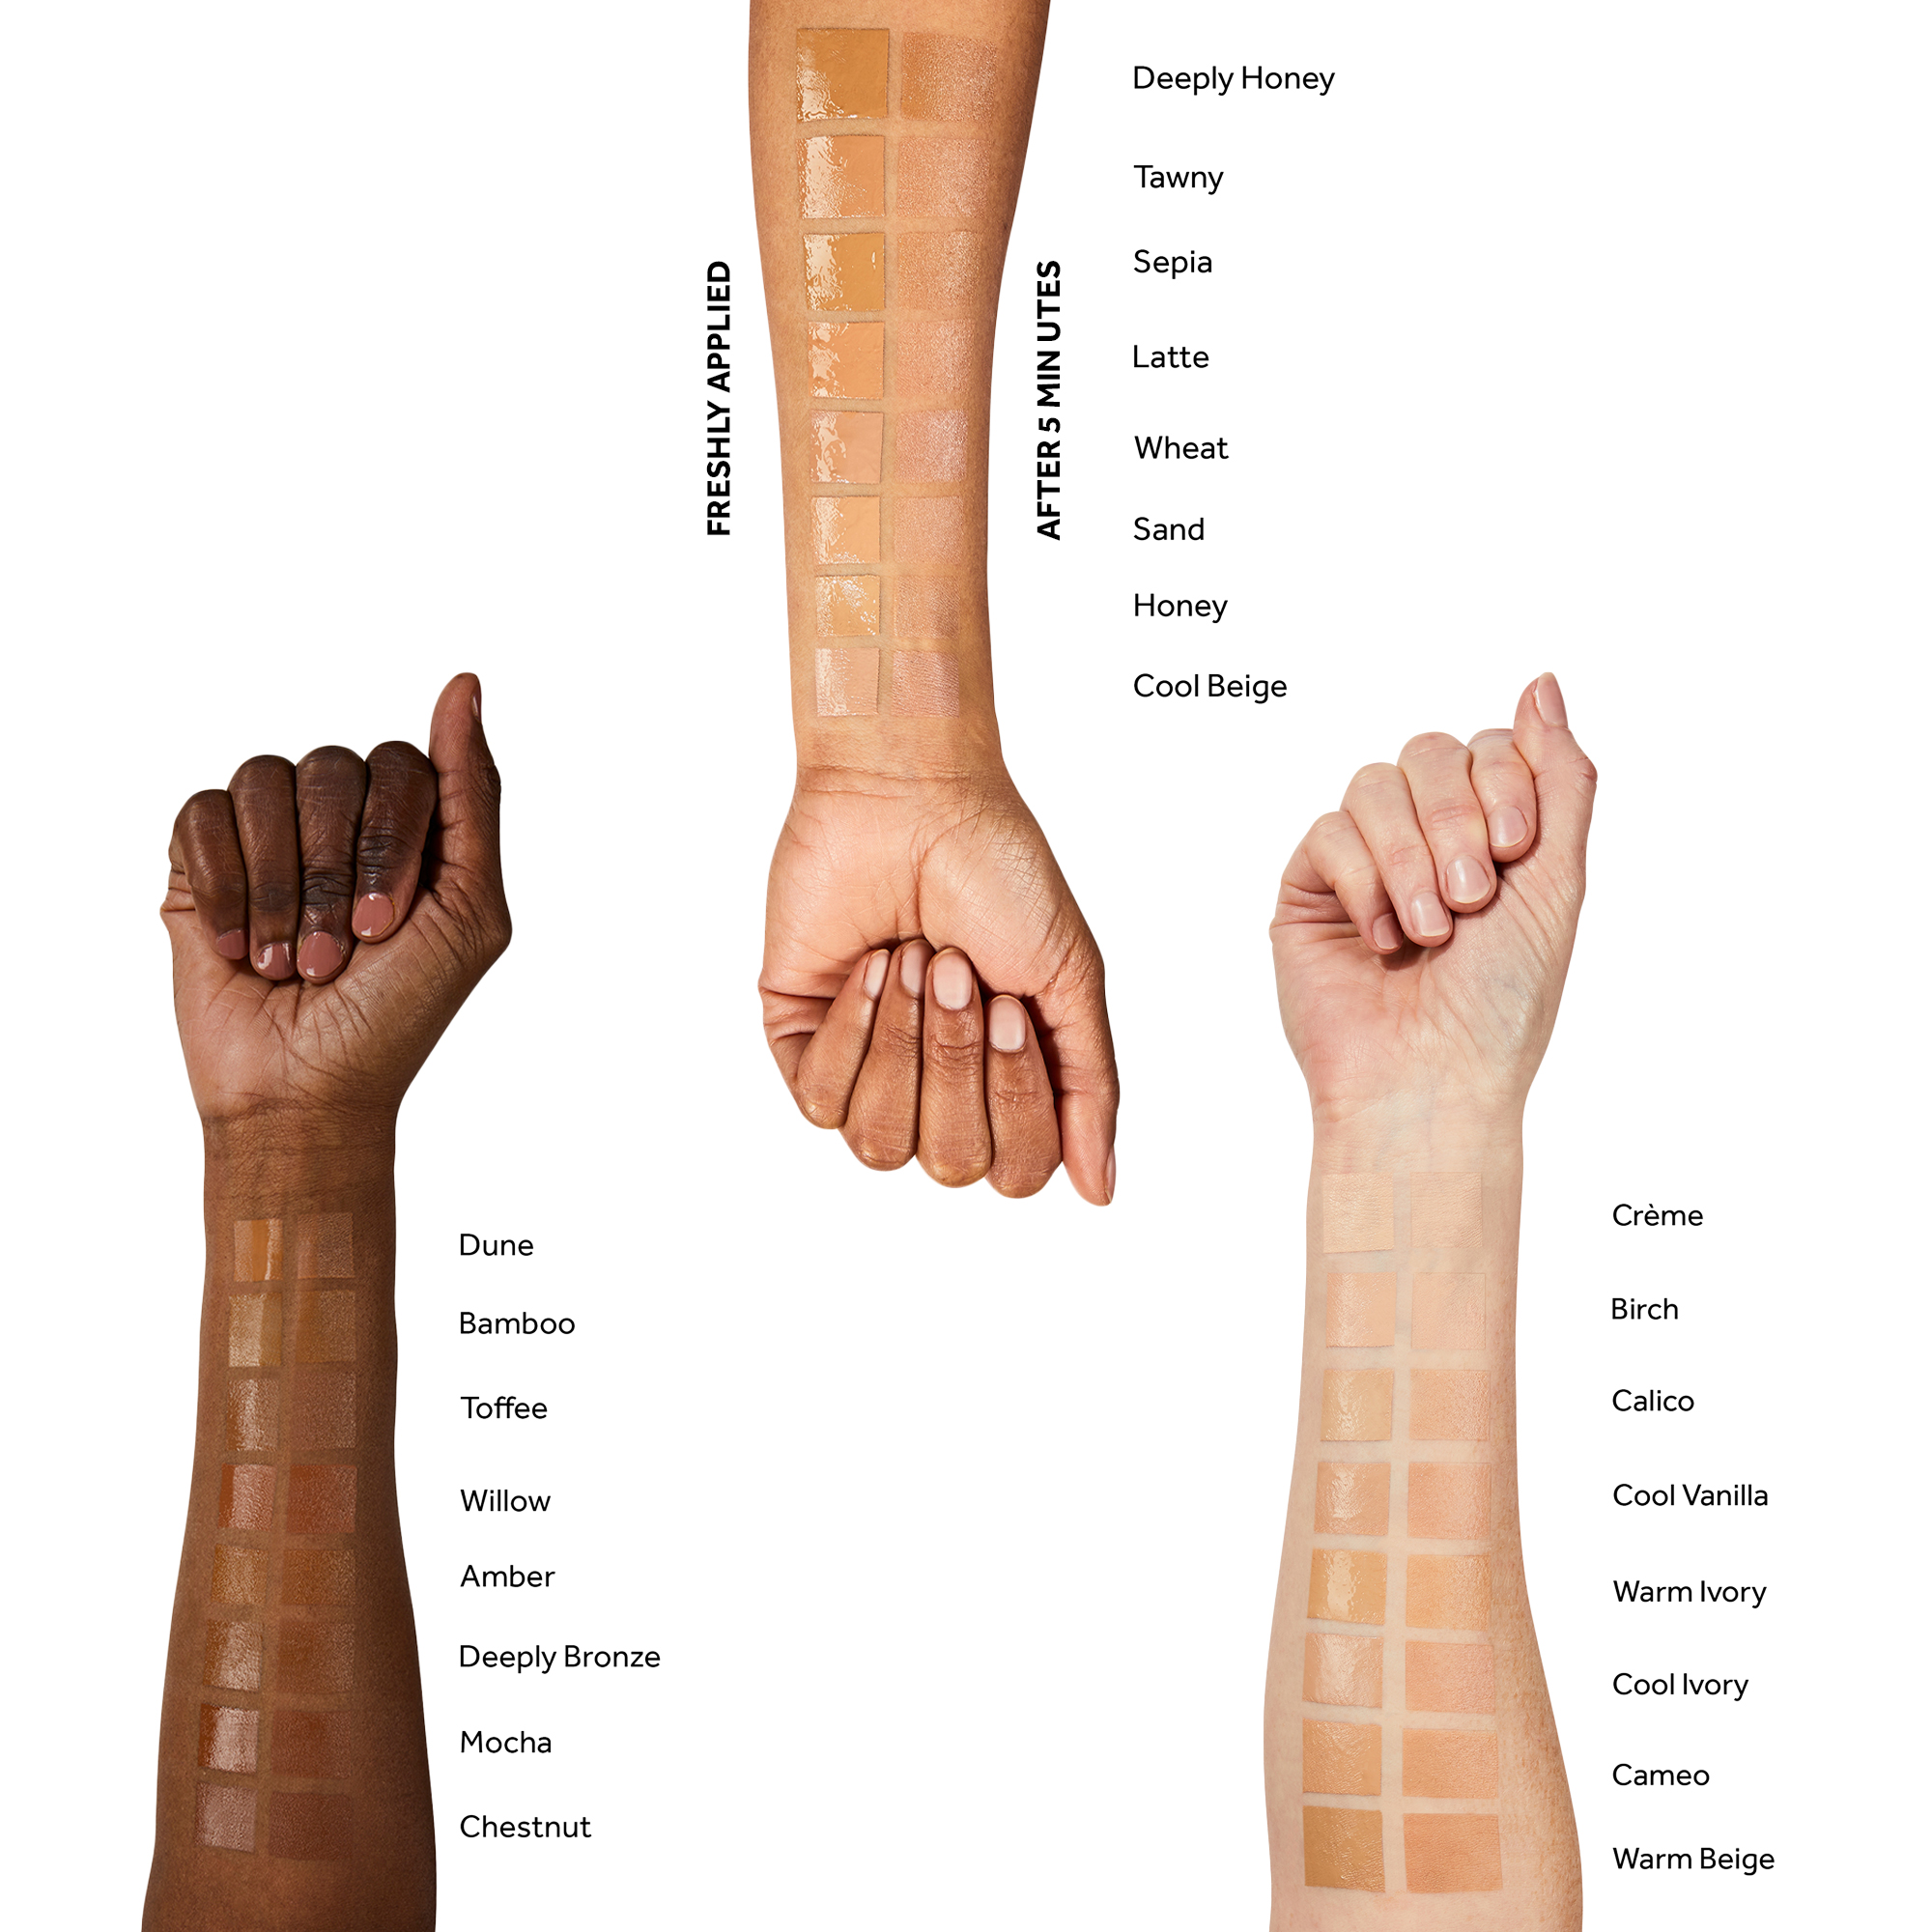 The image shows the different shades applied on arms with different skin tones. There are three arms in total and the shades are as follows, Dune, Bamboo, Toffee, Willow, Amber, Deeply Bronze, Mocha, Chestnut, FRESHLY APPLIED AFTER 5 MINUTES, Deeply Honey, Tawny, Sepia, Latte, Wheat, Sand, Honey, Cool Beige, Creme, Birch, Calico, Cool Vanilla, Warm Ivory, Cool Ivory, Cameo, Warm Beige